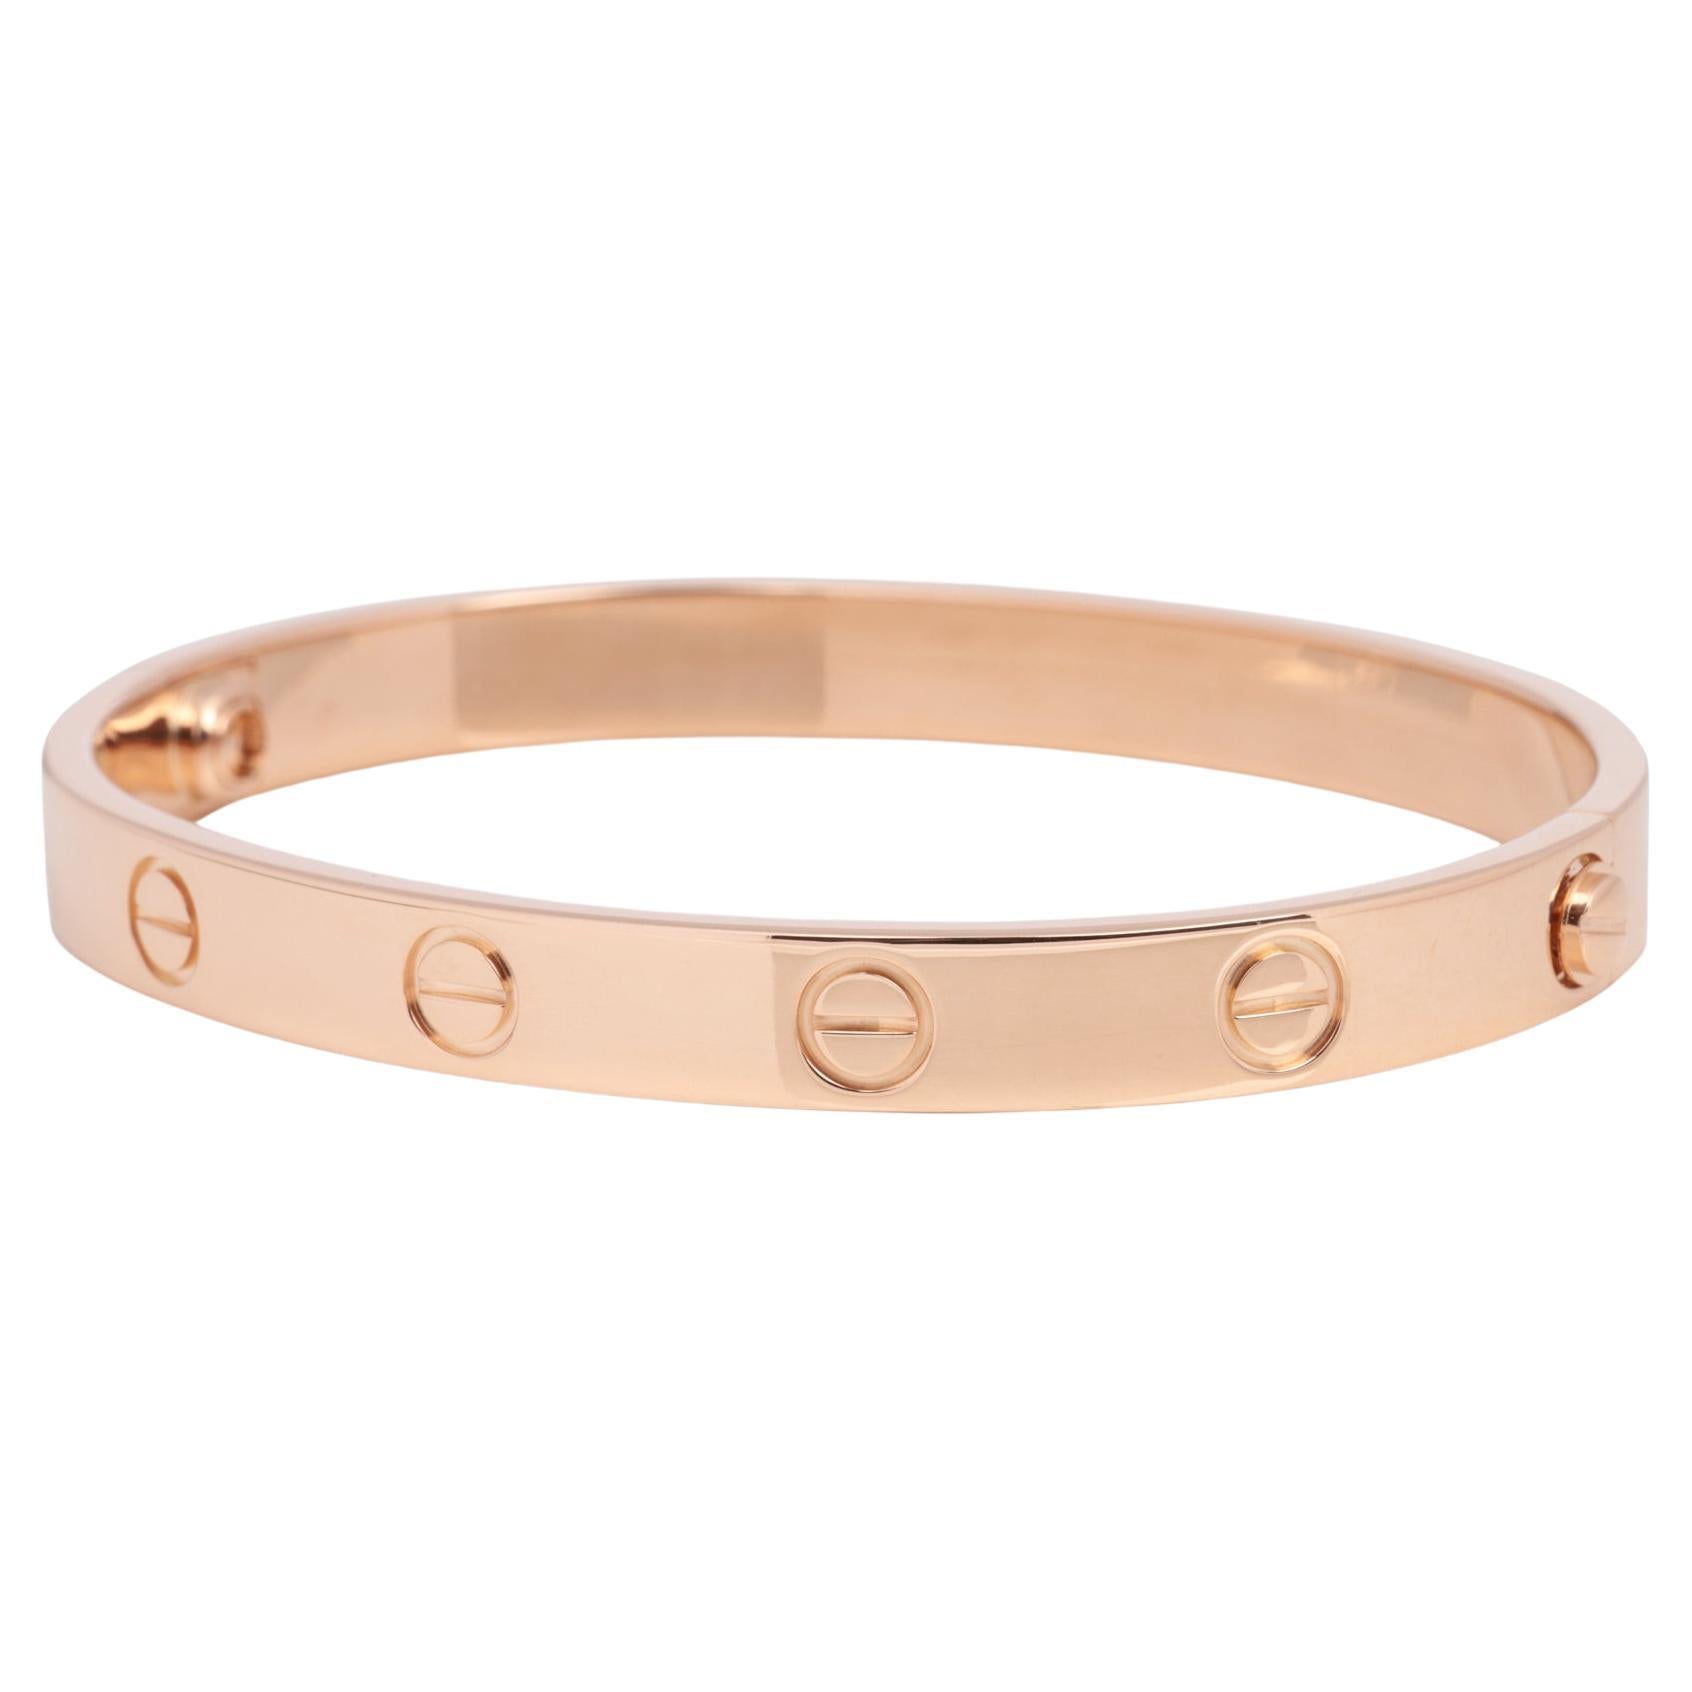 Cartier 18ct Rose Gold Love Bangle